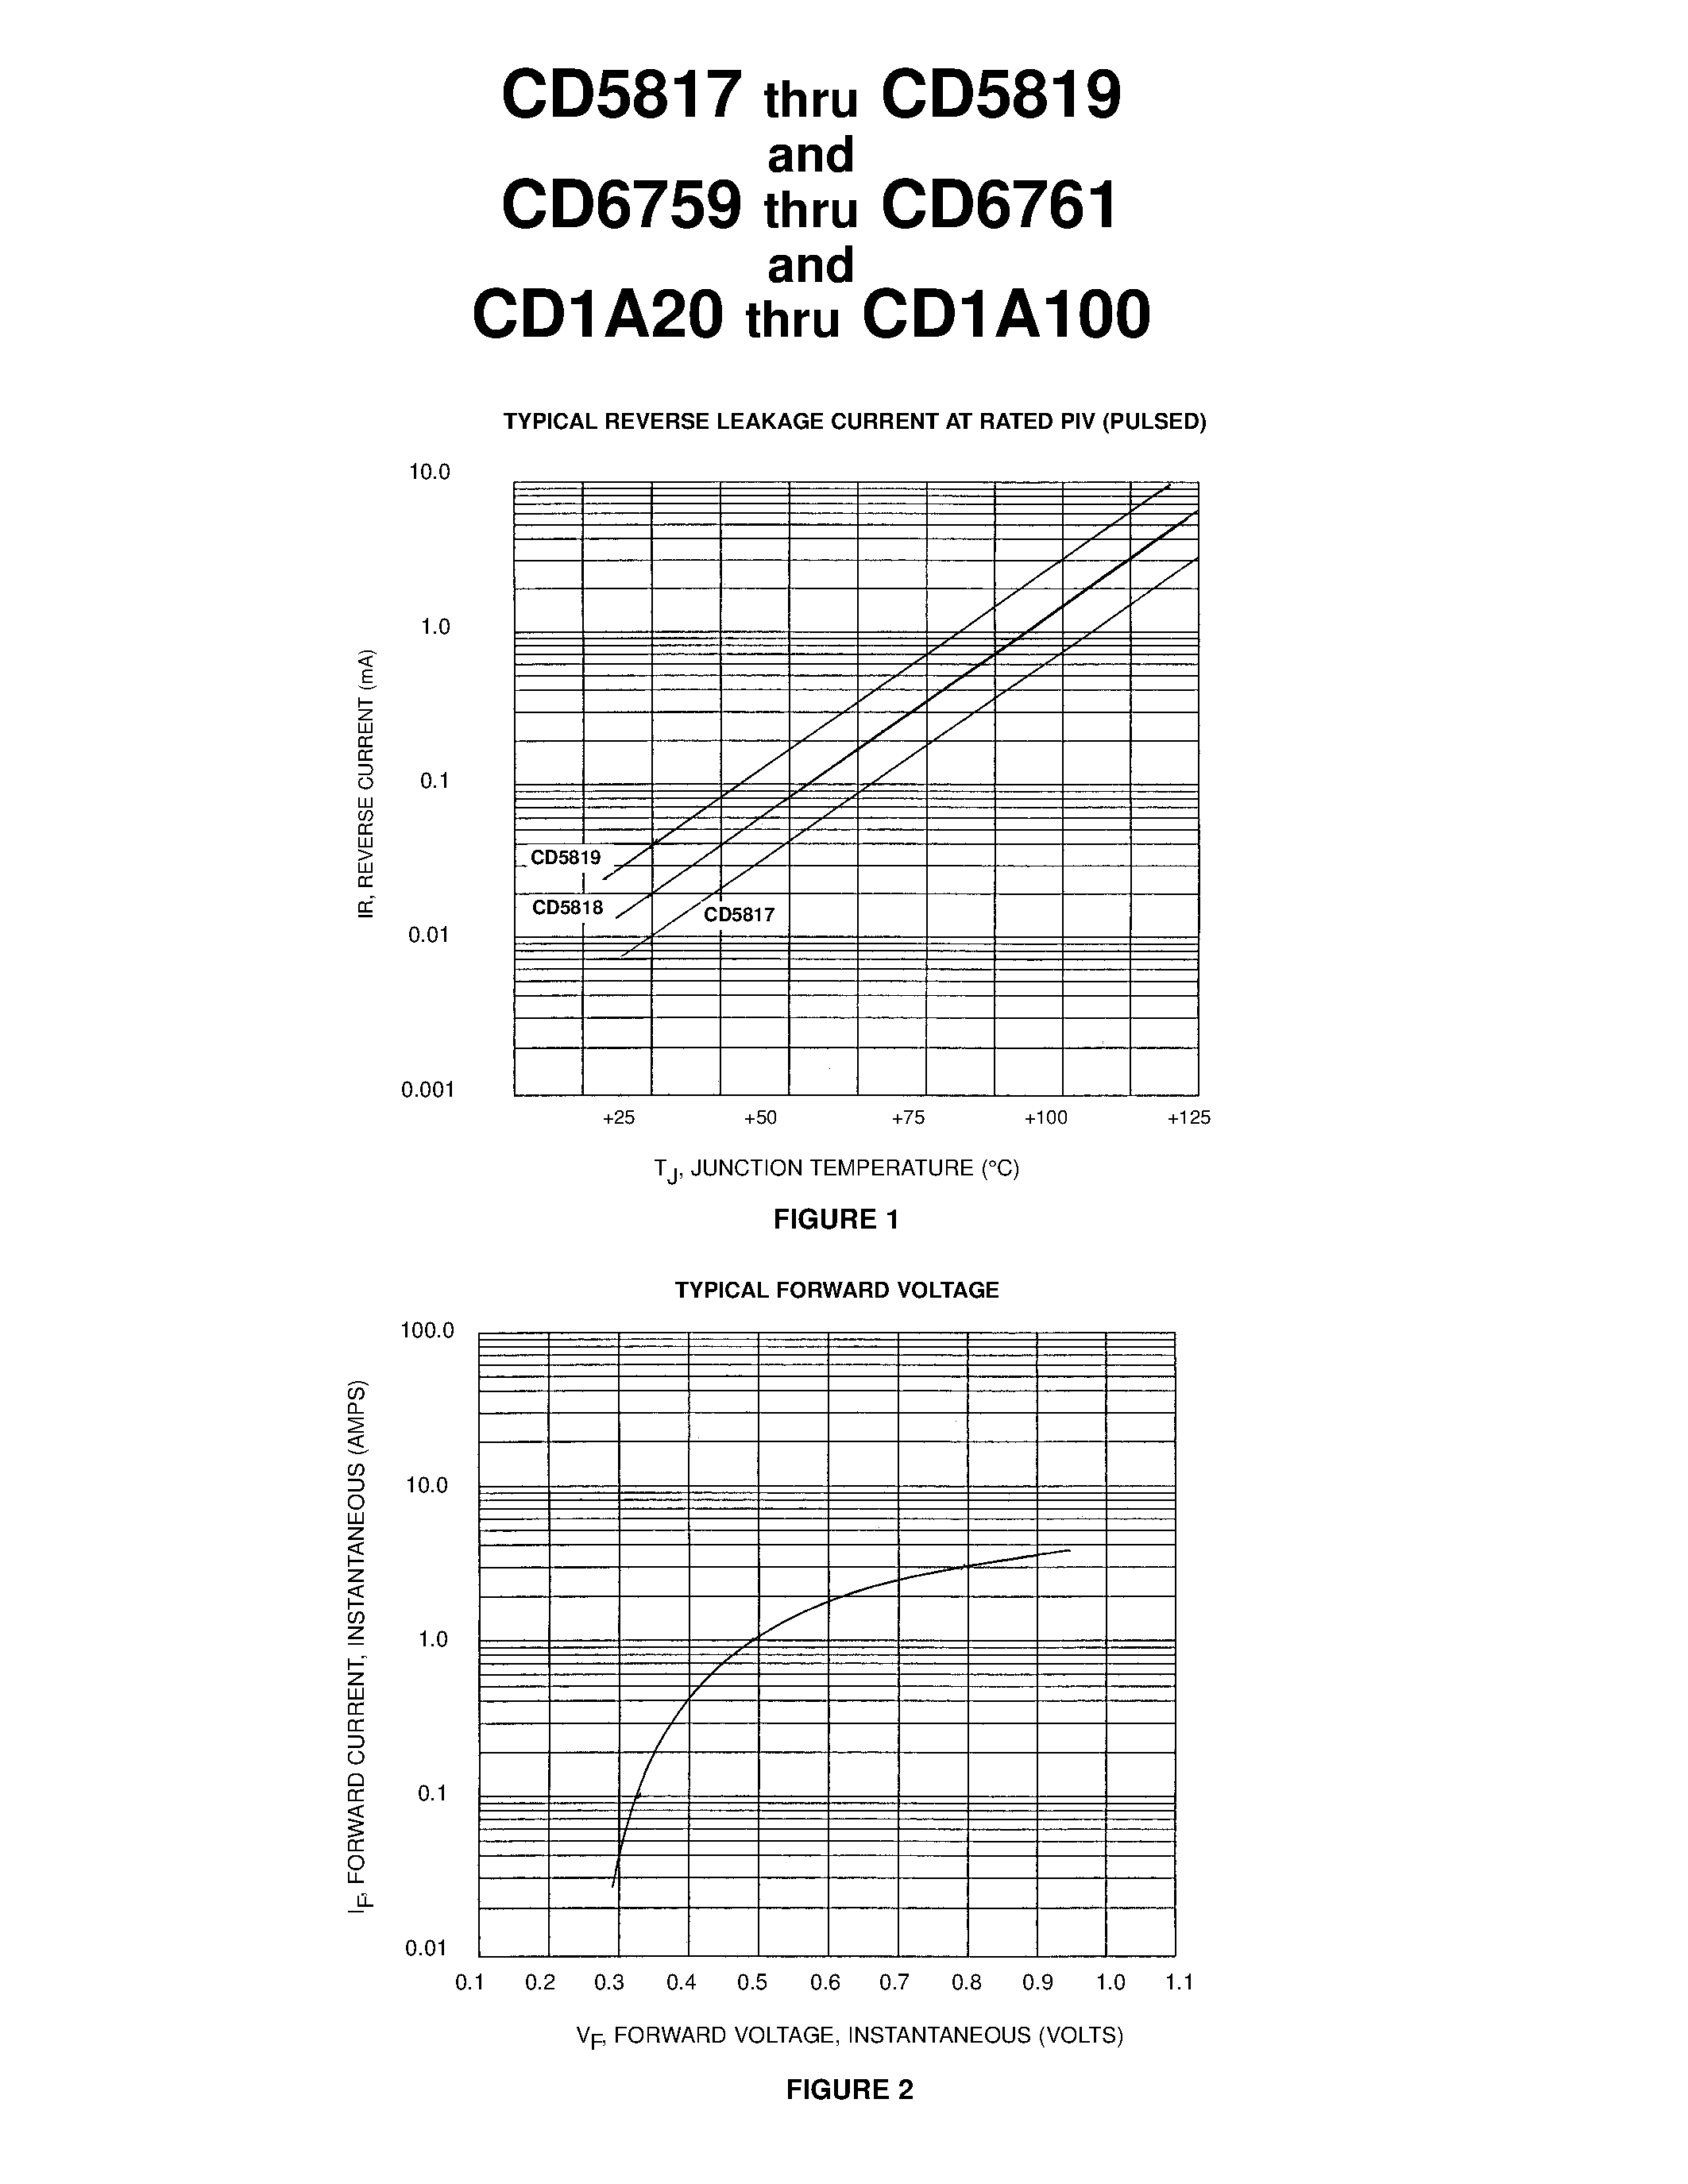 Datasheet CD1A20 - 1 AMP SCHOTTKY BARRIER RECTIFIER CHIPS page 2